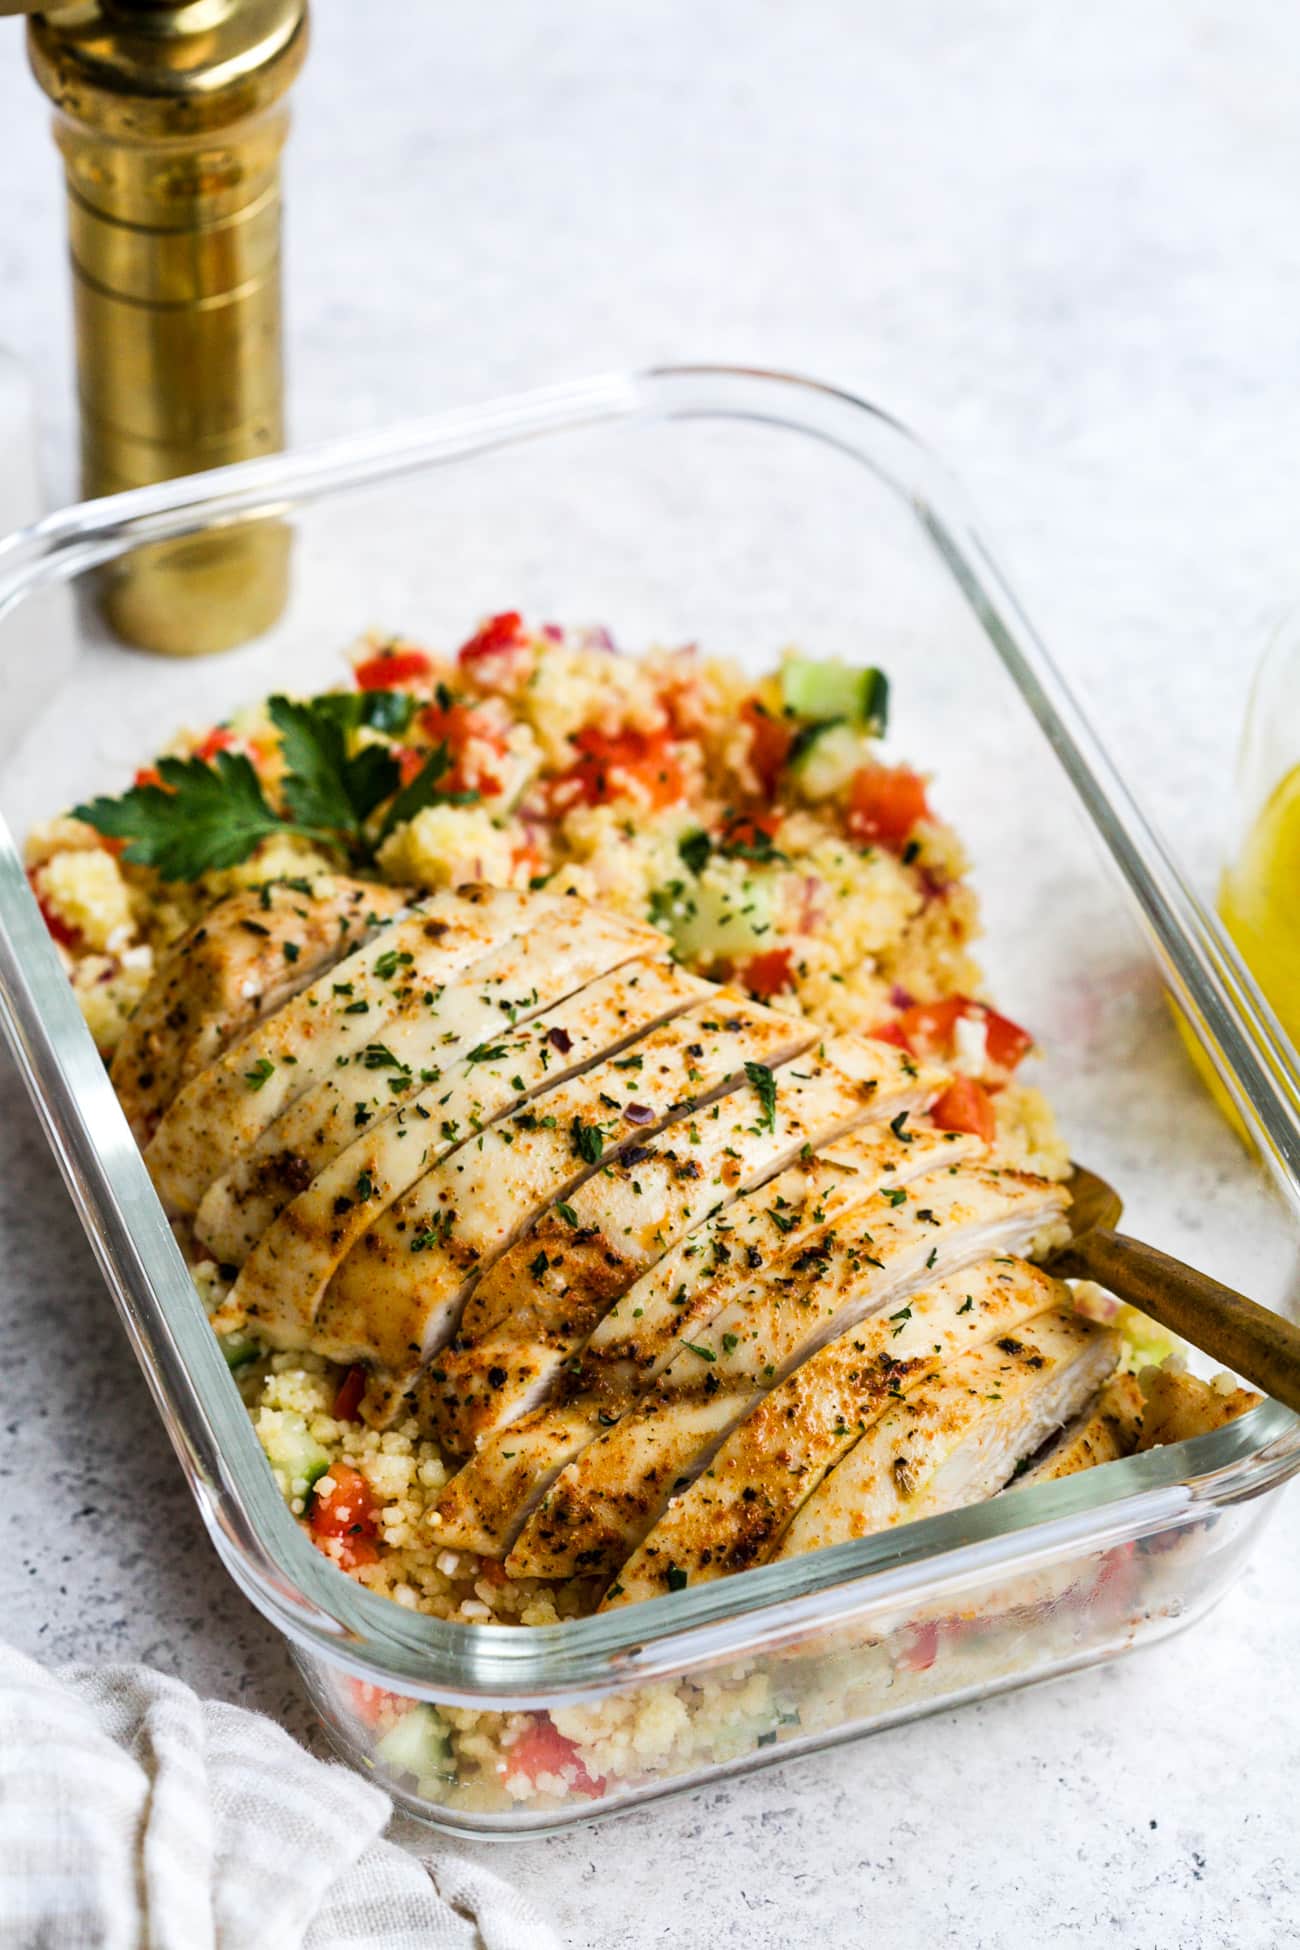 Chicken couscous salad in a small, glass meal-prep container.